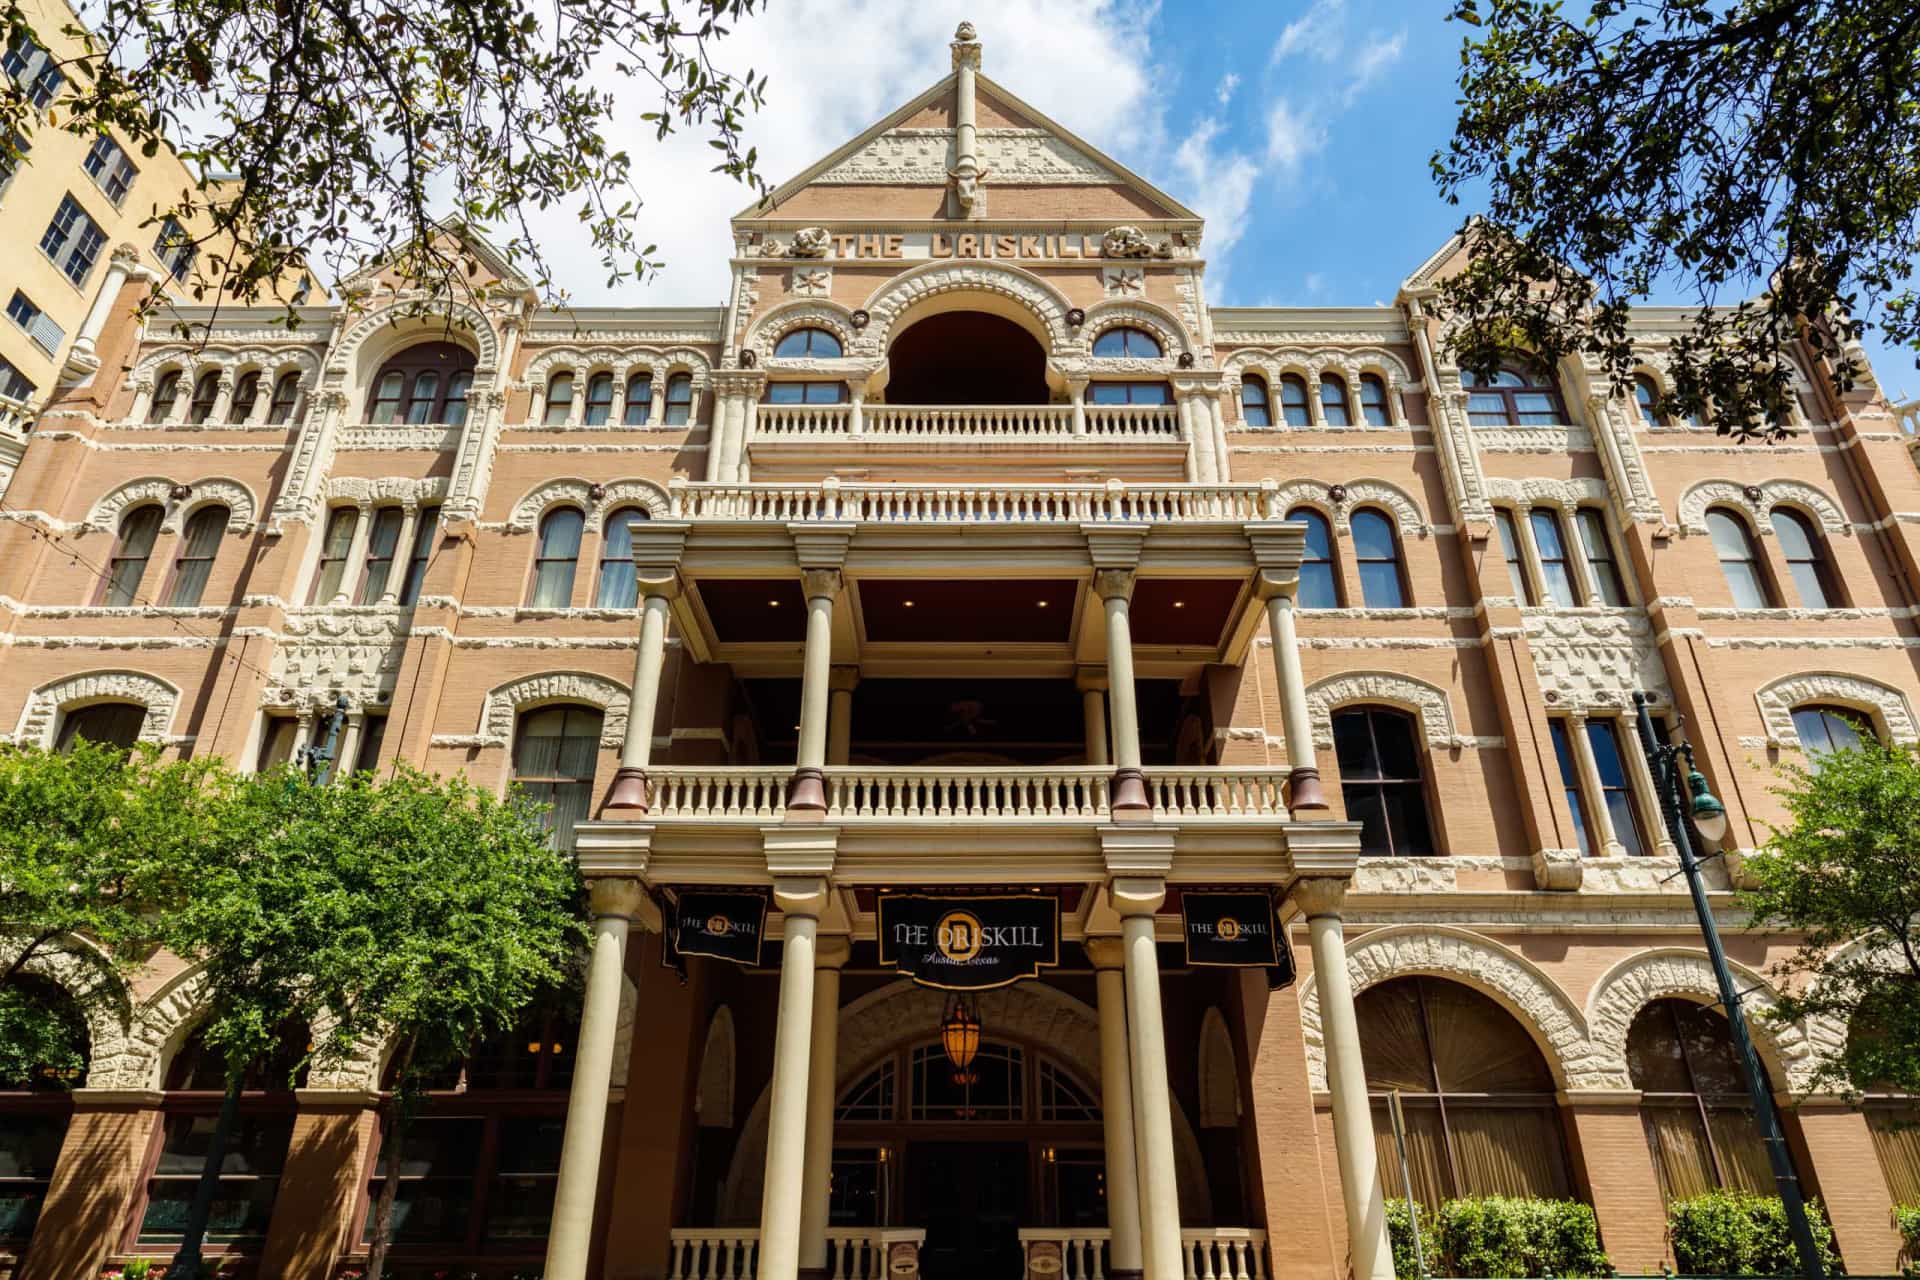 <p>The Driskill Hotel in Austin is the most haunted place in the Lone Star state. Notable ghosts include former owner Jesse Driskill, a woman who killed herself in room 329, and even Lyndon and Lady Bird Johnson.</p>